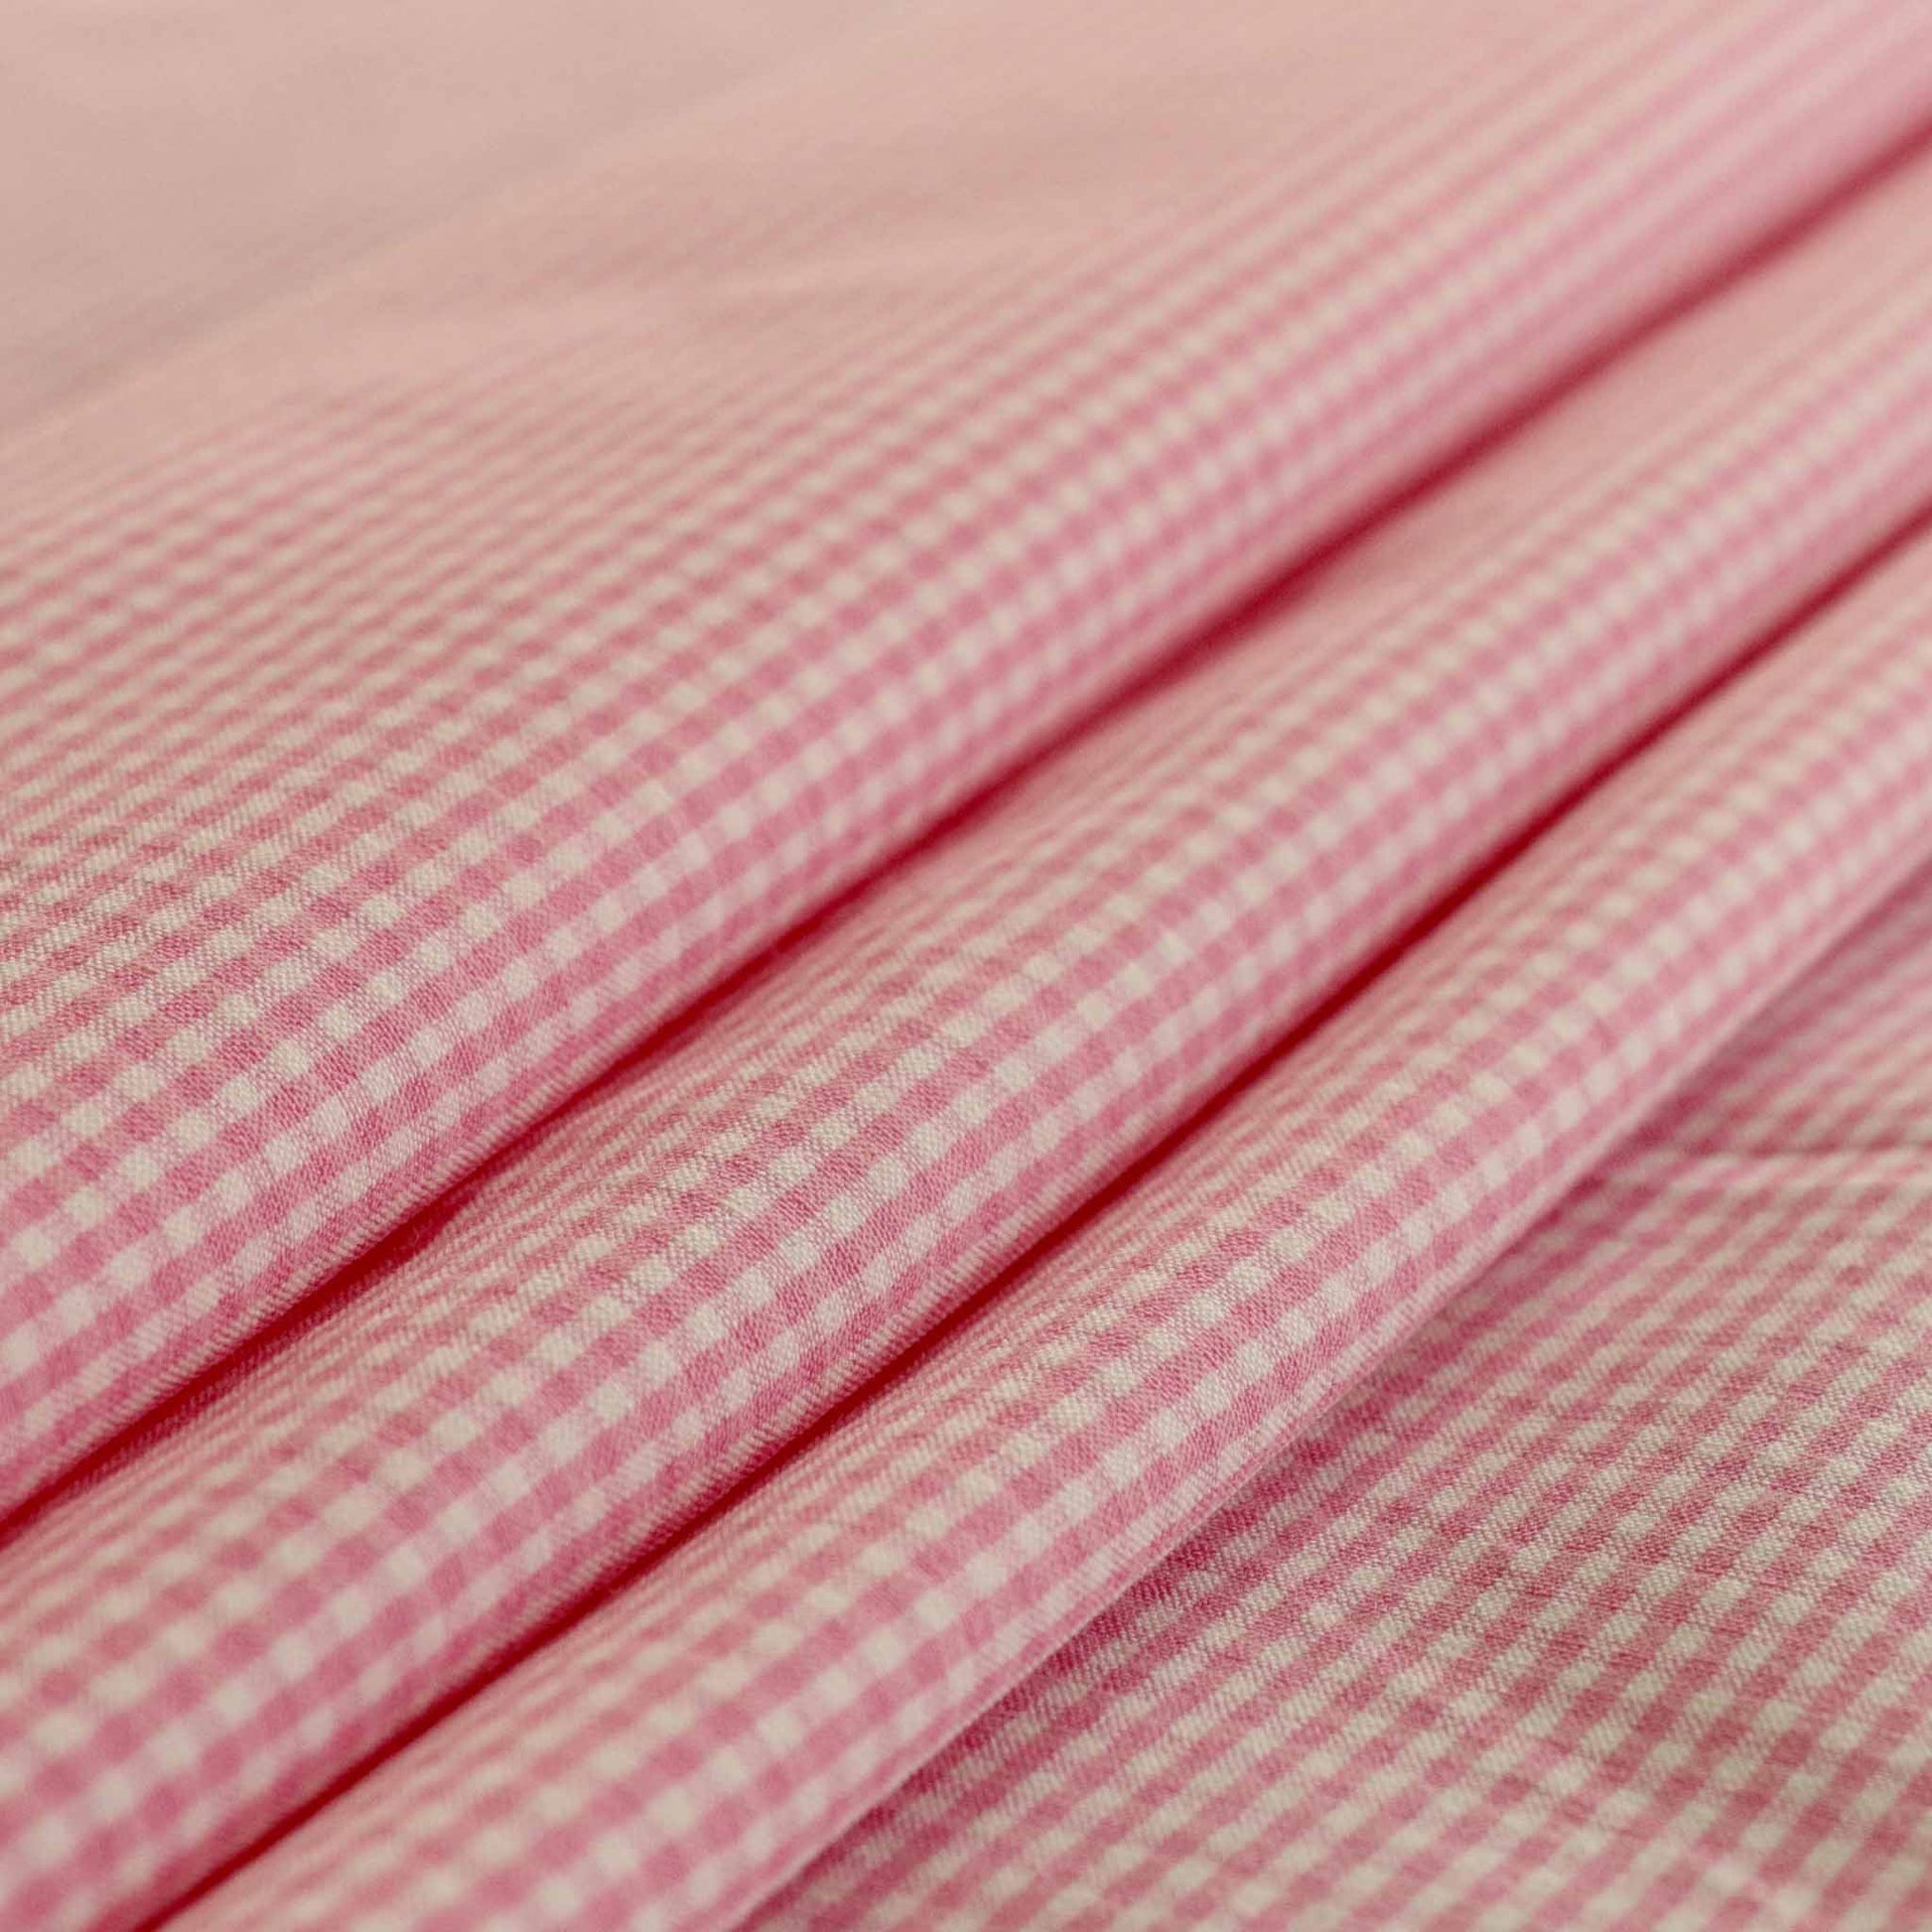 folded bengaline suiting pink and white dressmaking fabric with gingham check design